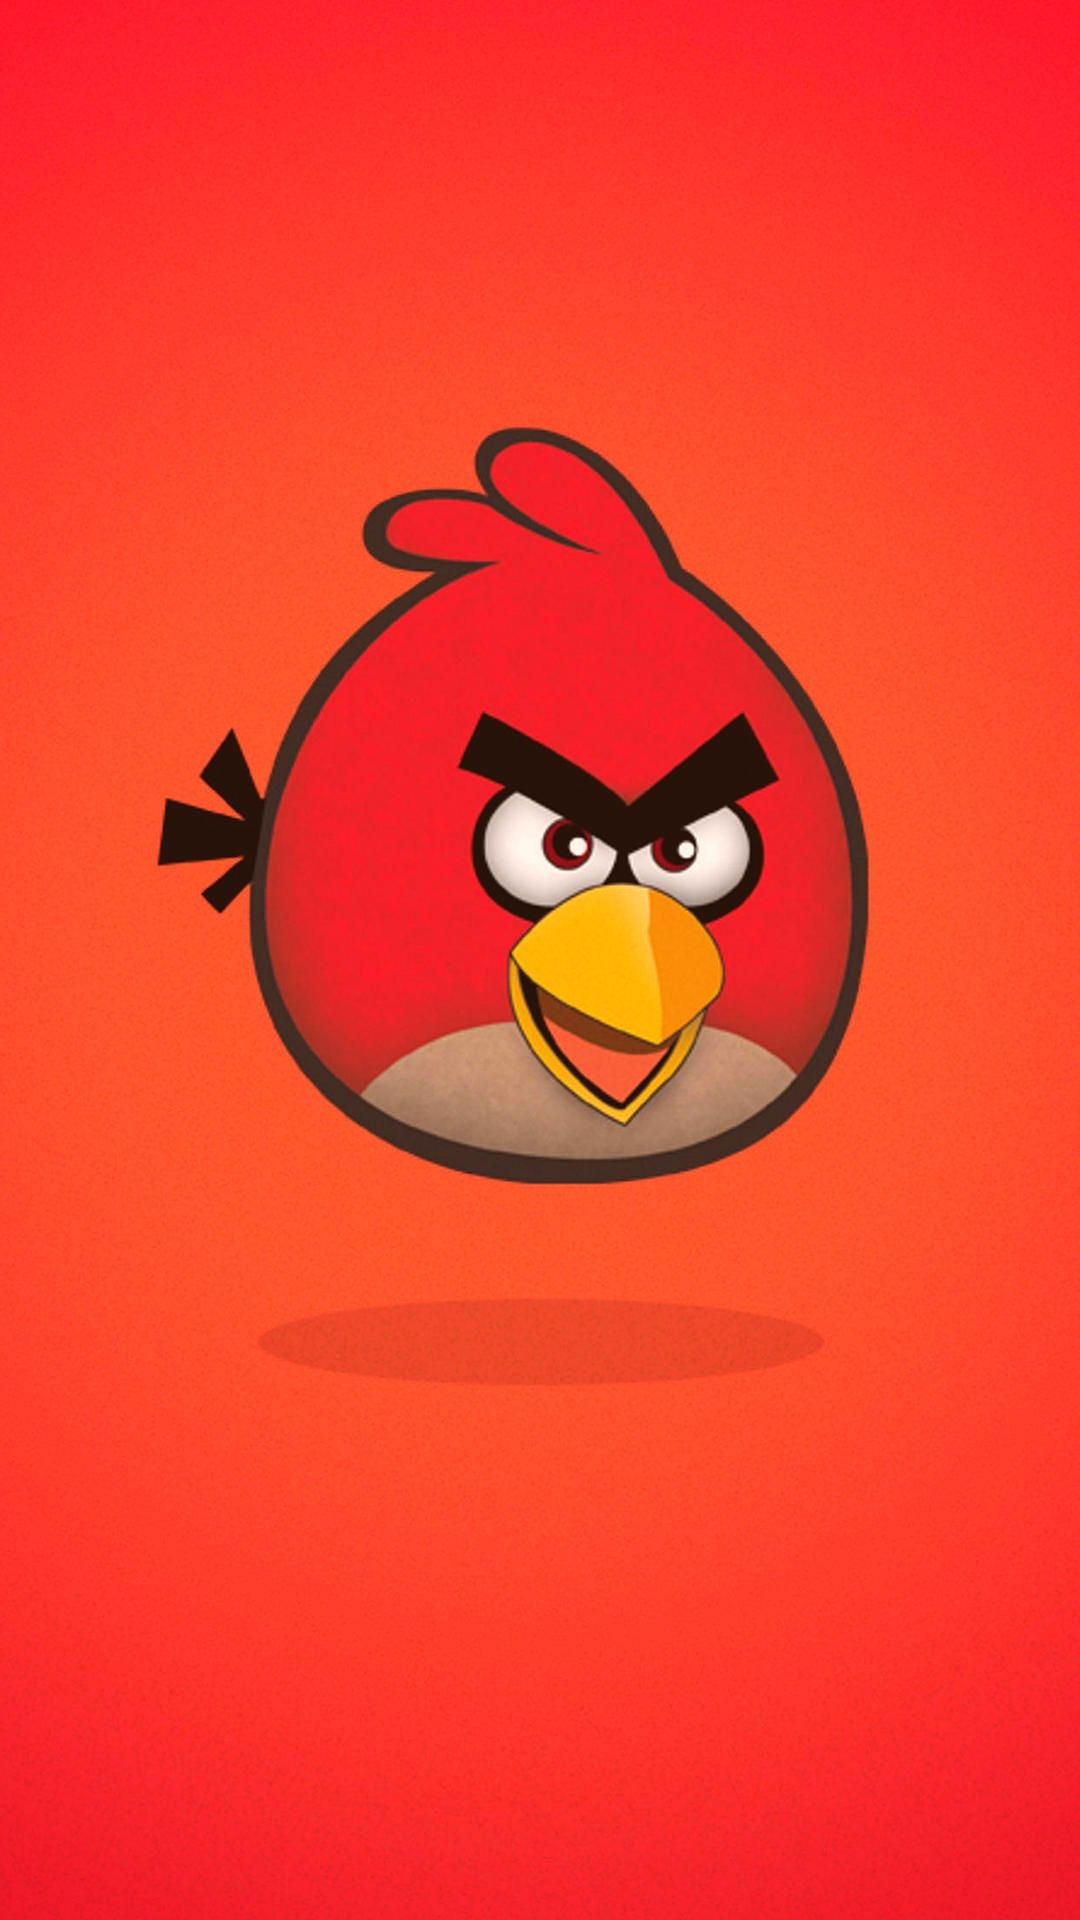 Minimalist Angry Birds wallpaper, High definition, Crazy design, Character showcase, 1080x1920 Full HD Handy